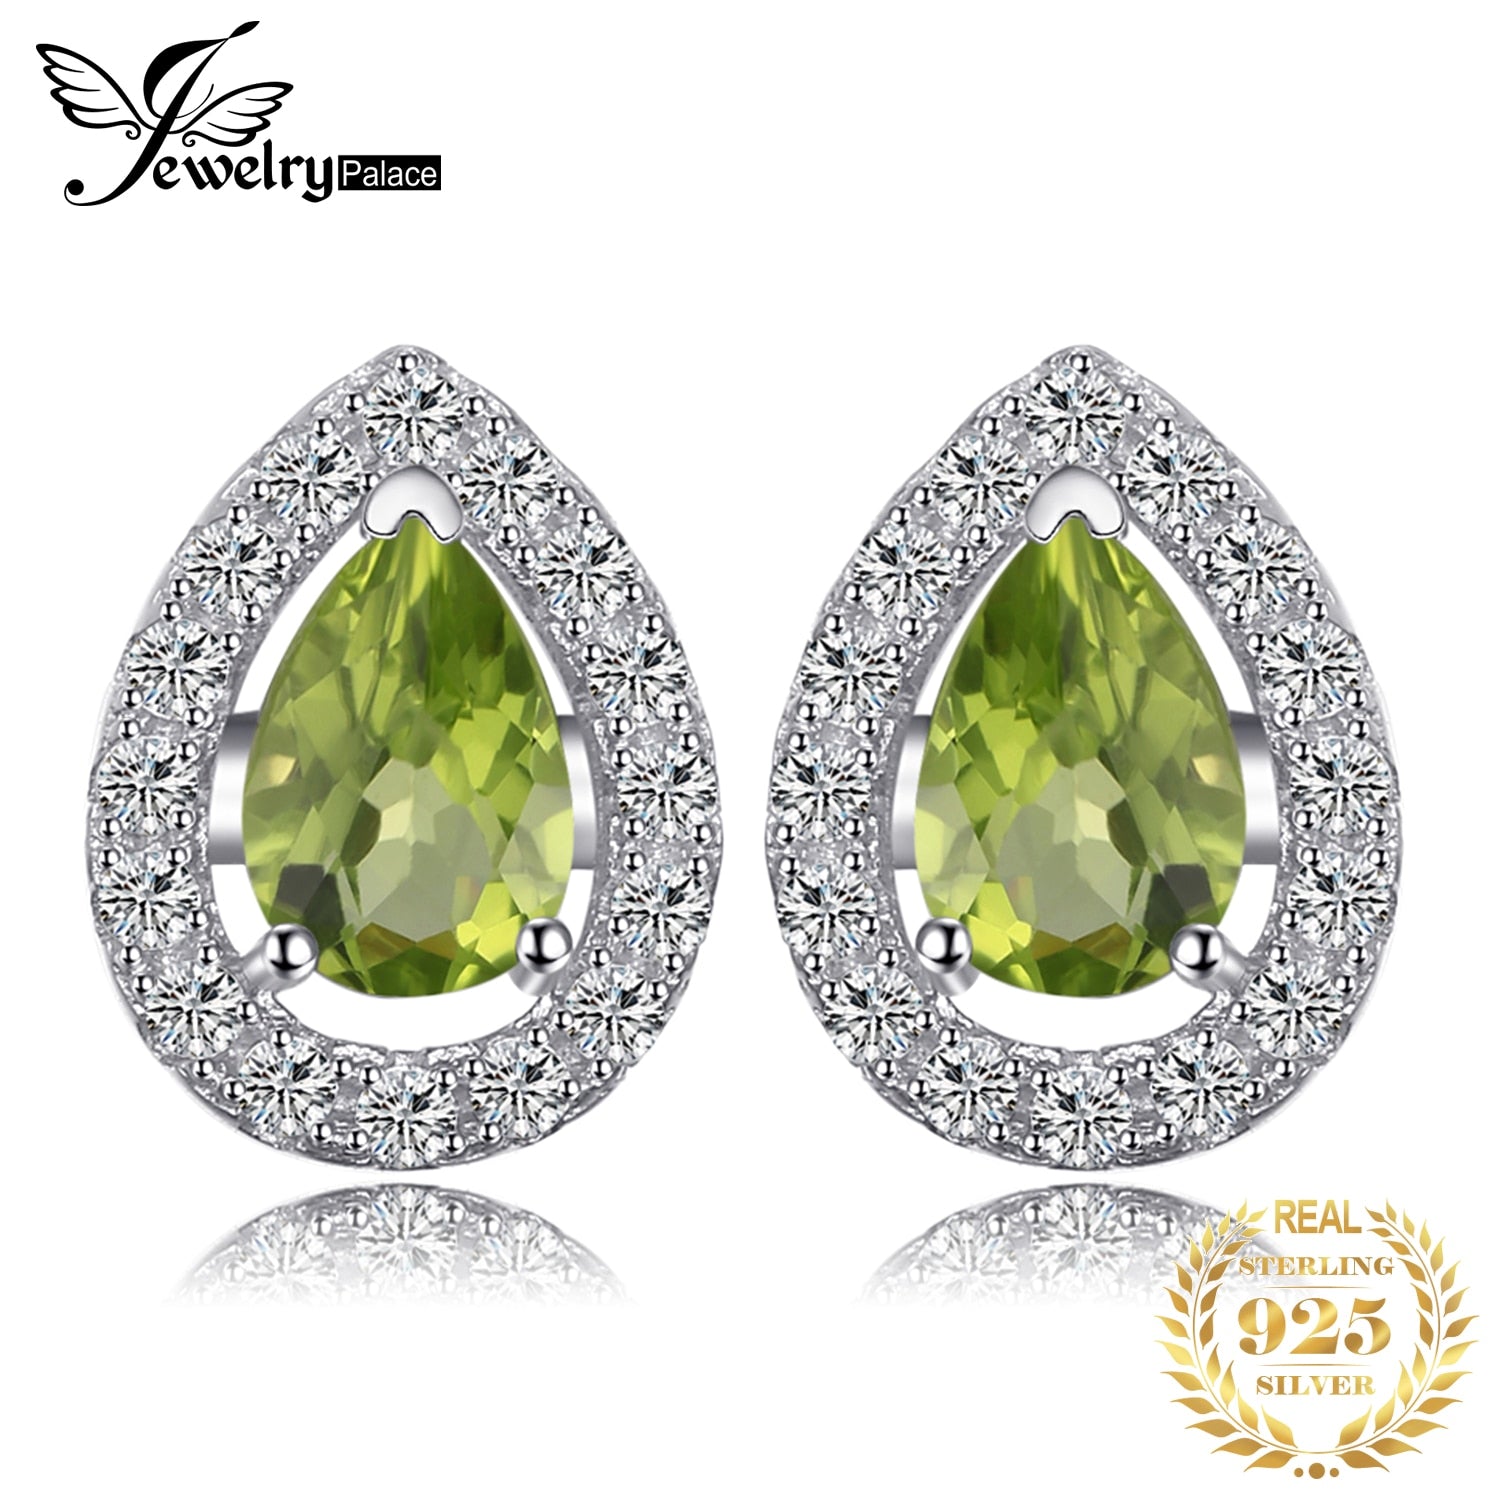 JewelryPalace Pear Natural Green Peridot 925 Sterling Silver Stud Earrings for Women Fashion Gemstone Jewelry Party Accessories Default Title